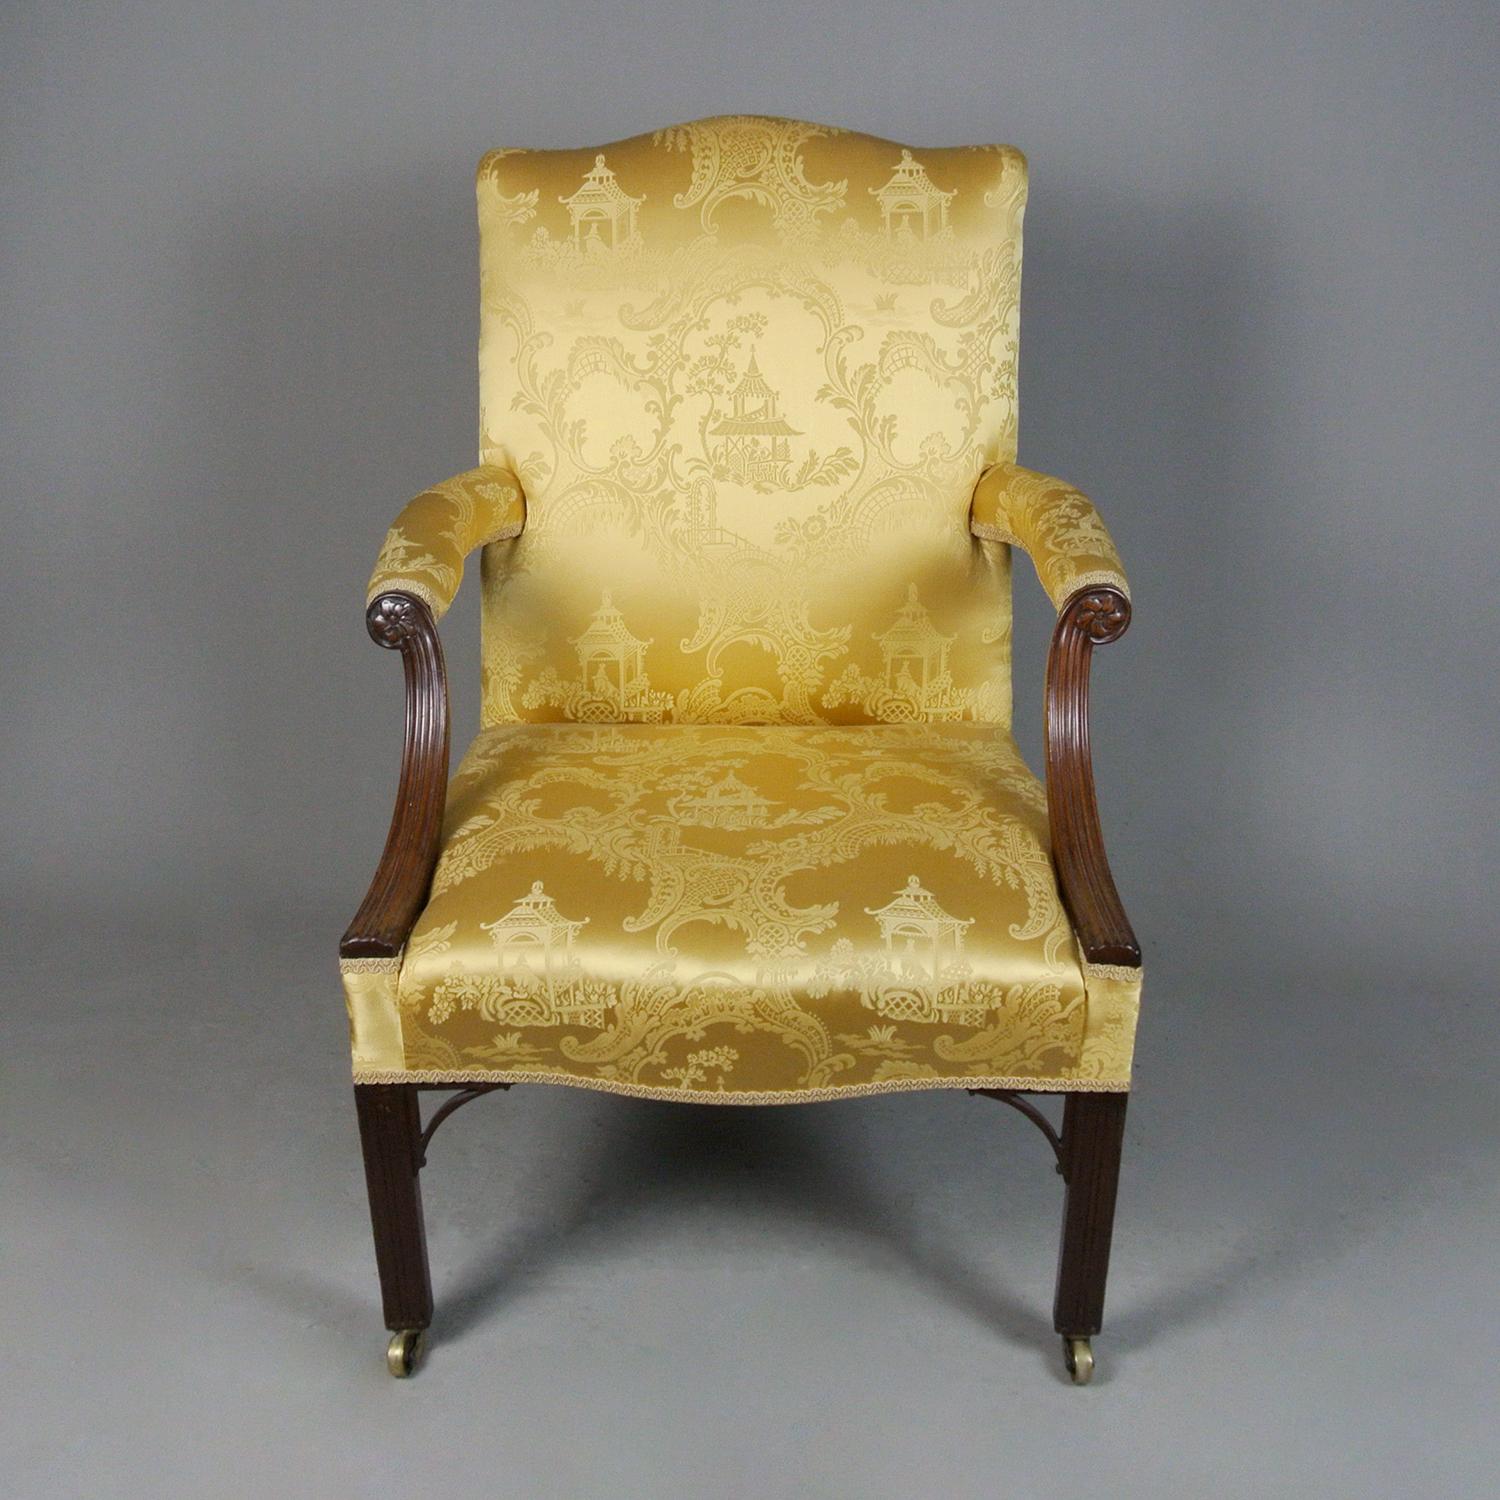 Exemplary George II Mahogany Gainsborough Chair c.1750 In Good Condition For Sale In Heathfield, GB